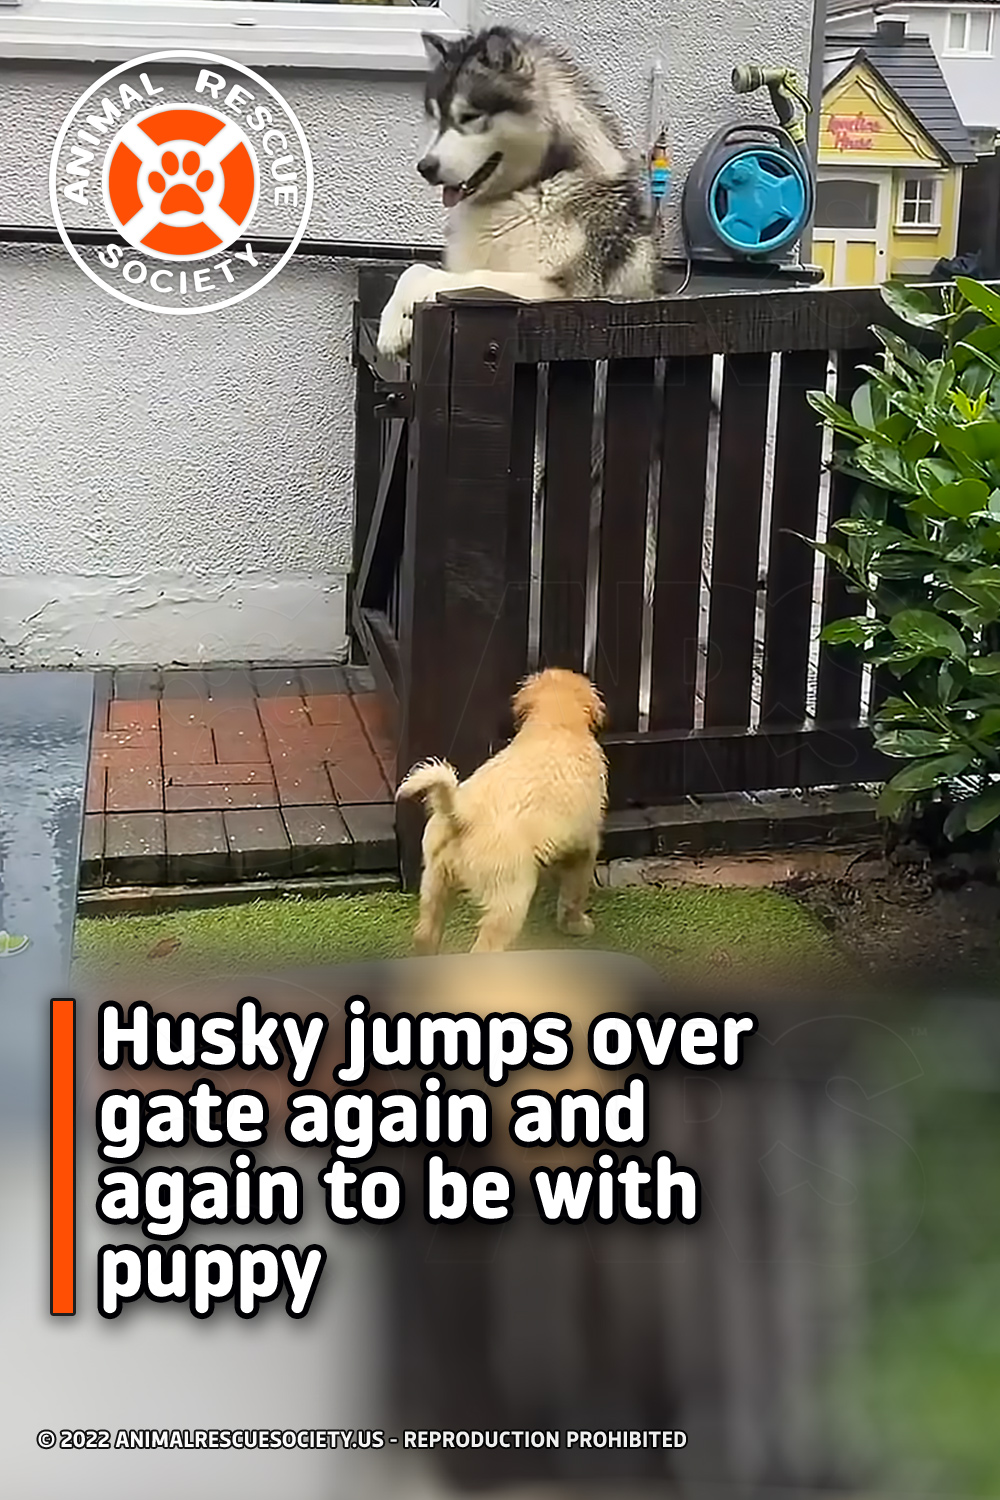 Husky jumps over gate again and again to be with puppy